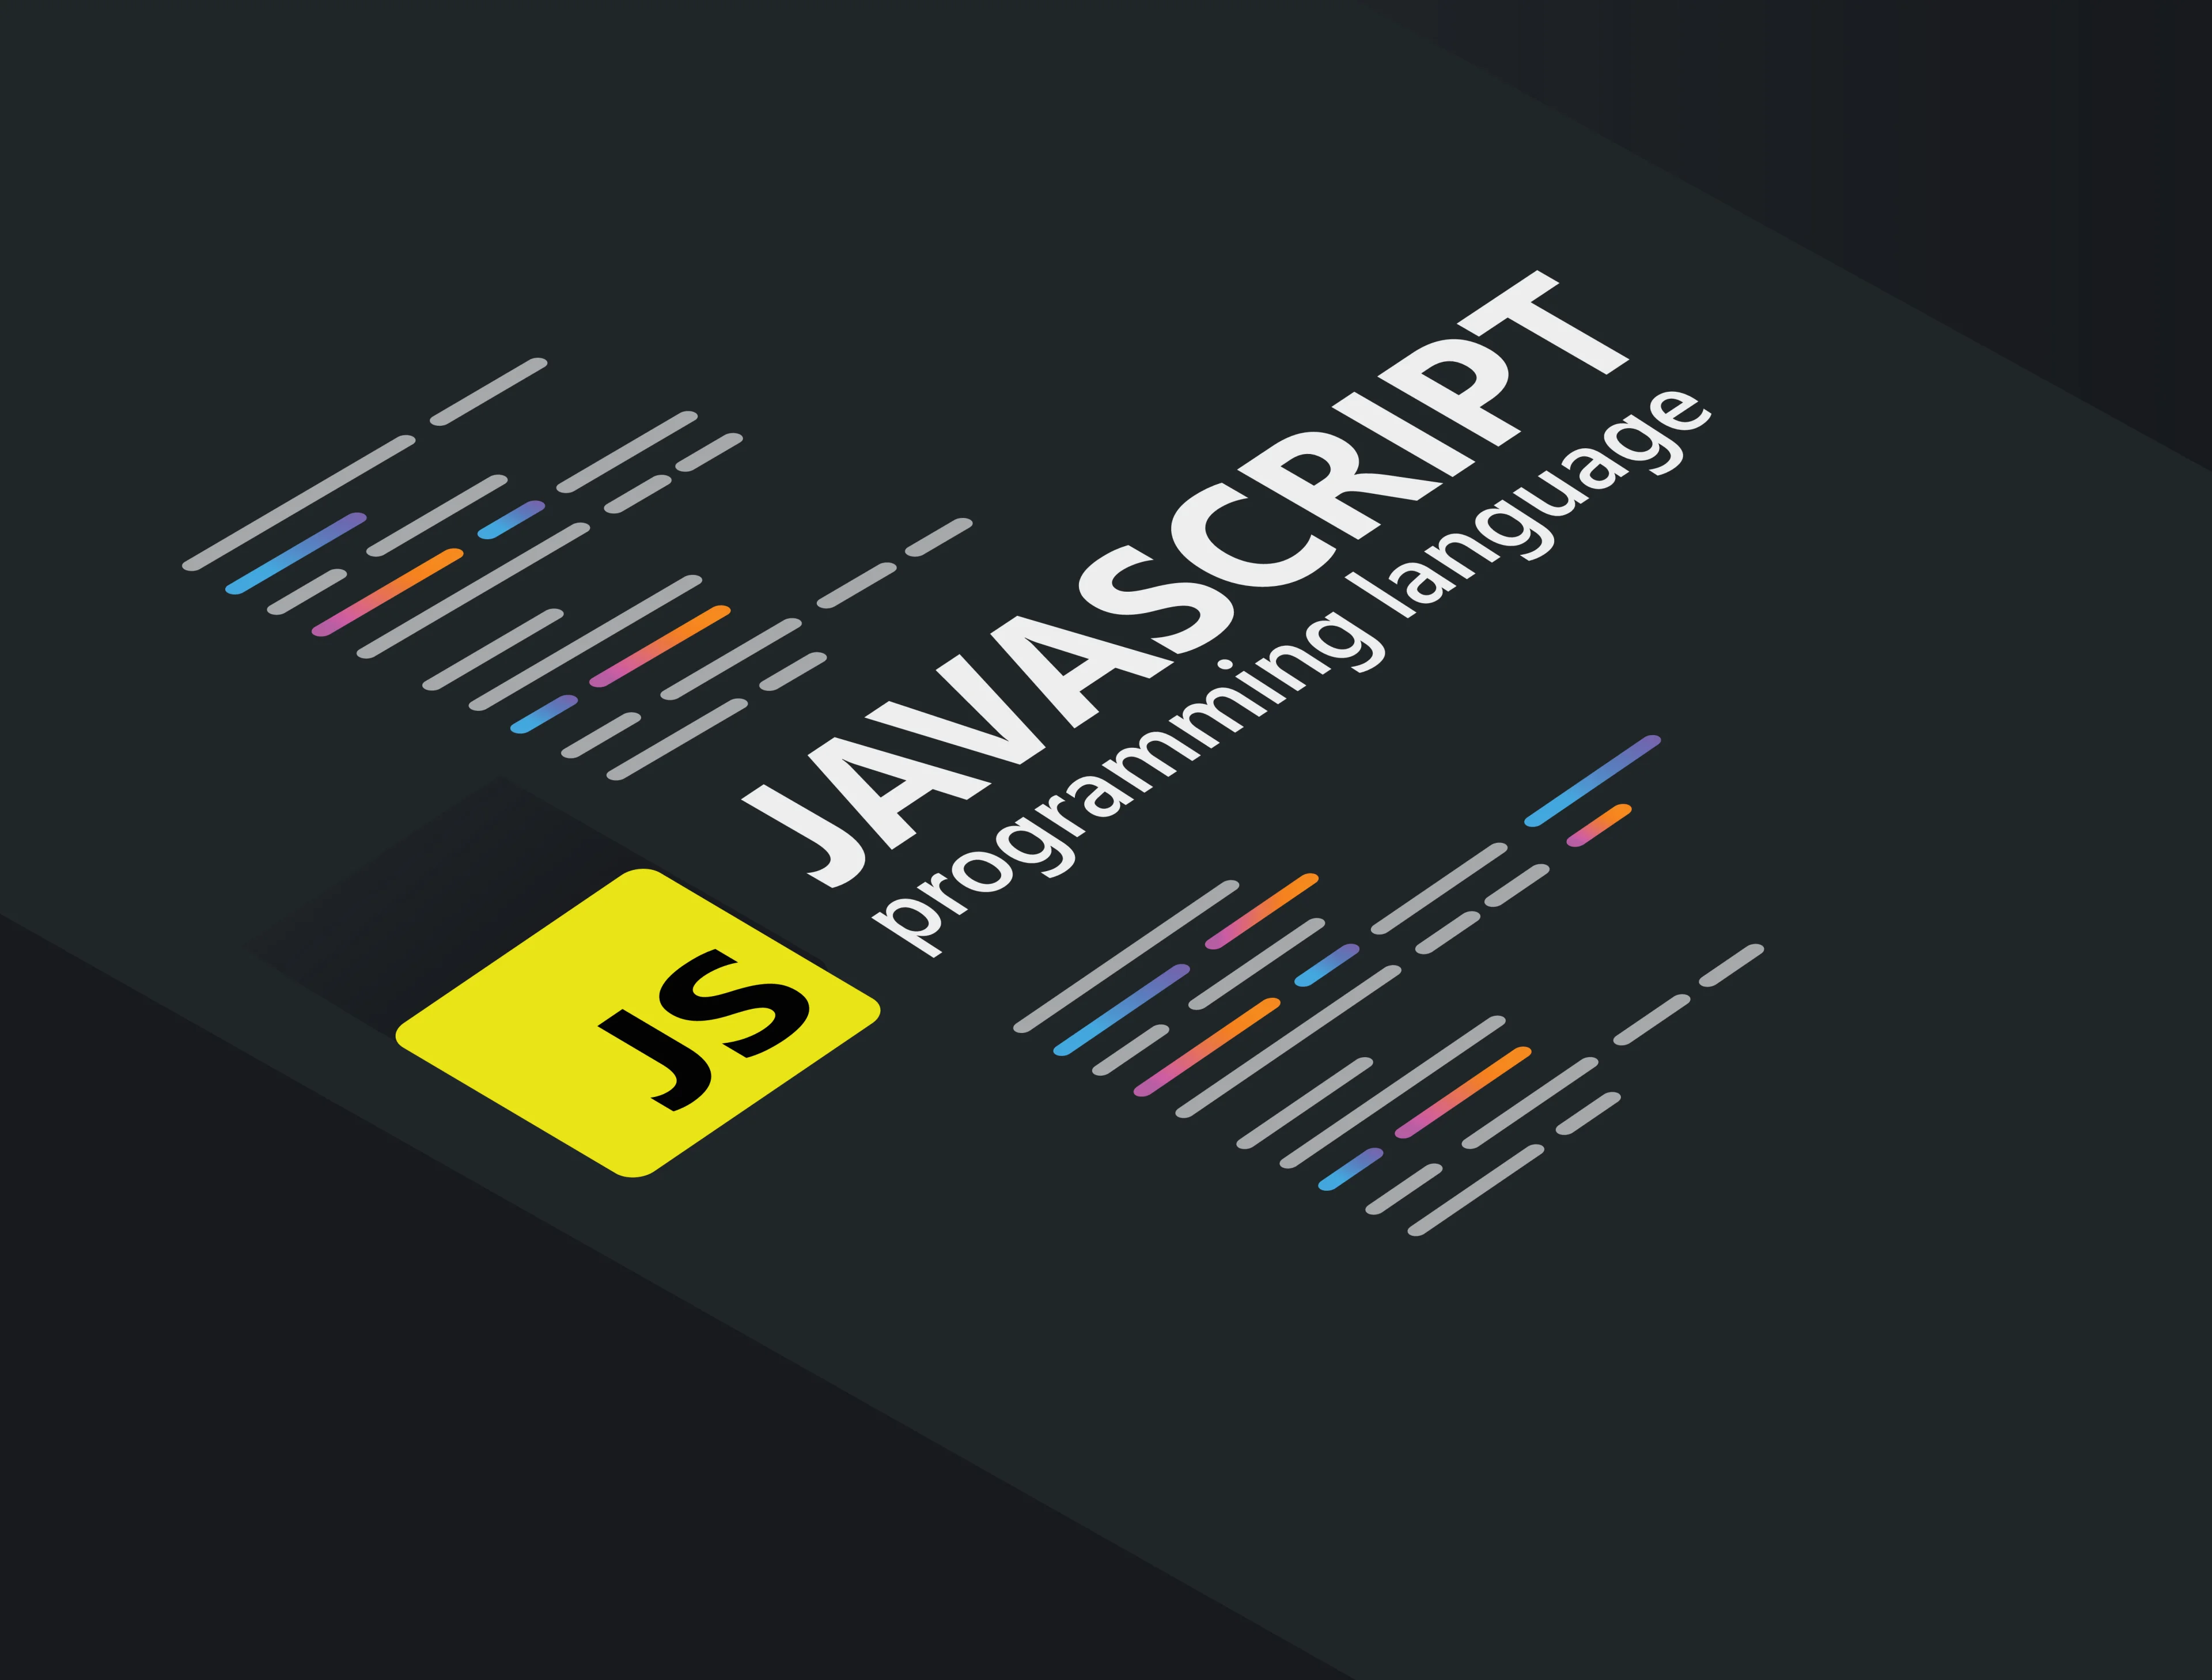 A comprehensive guide to the top 10 JavaScript frameworks for frontend and backend development in 2023. 